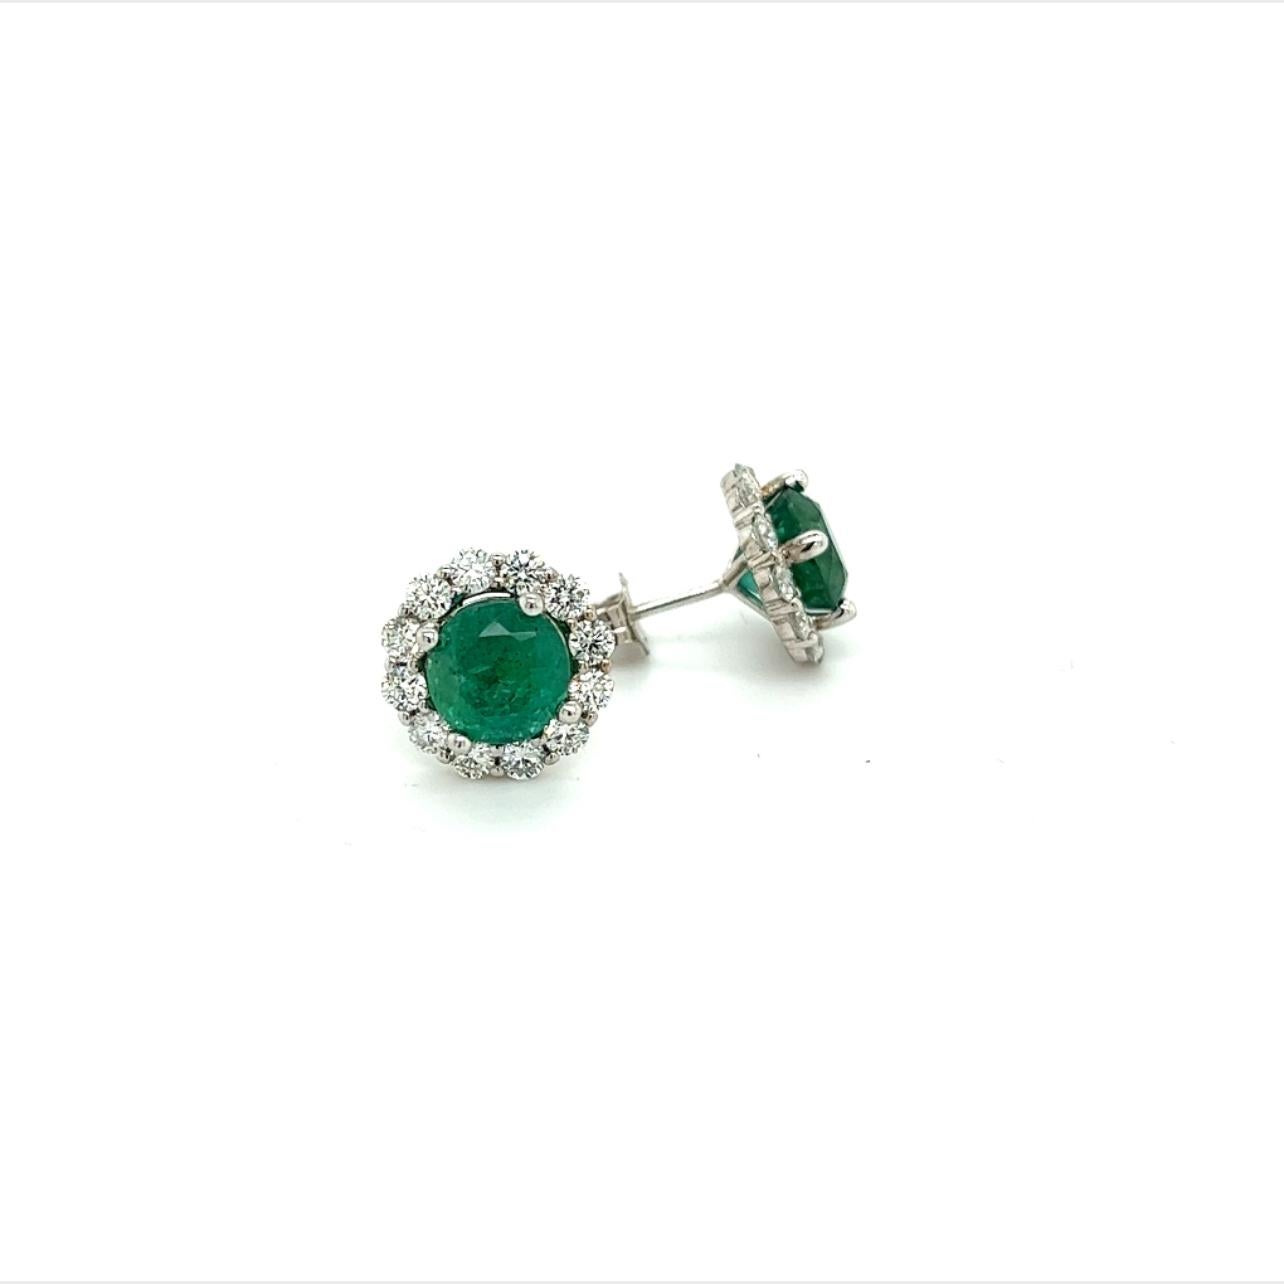 Round Cut Natural Emerald Diamond Earrings 18k White Gold 3.8 TCW Certified For Sale